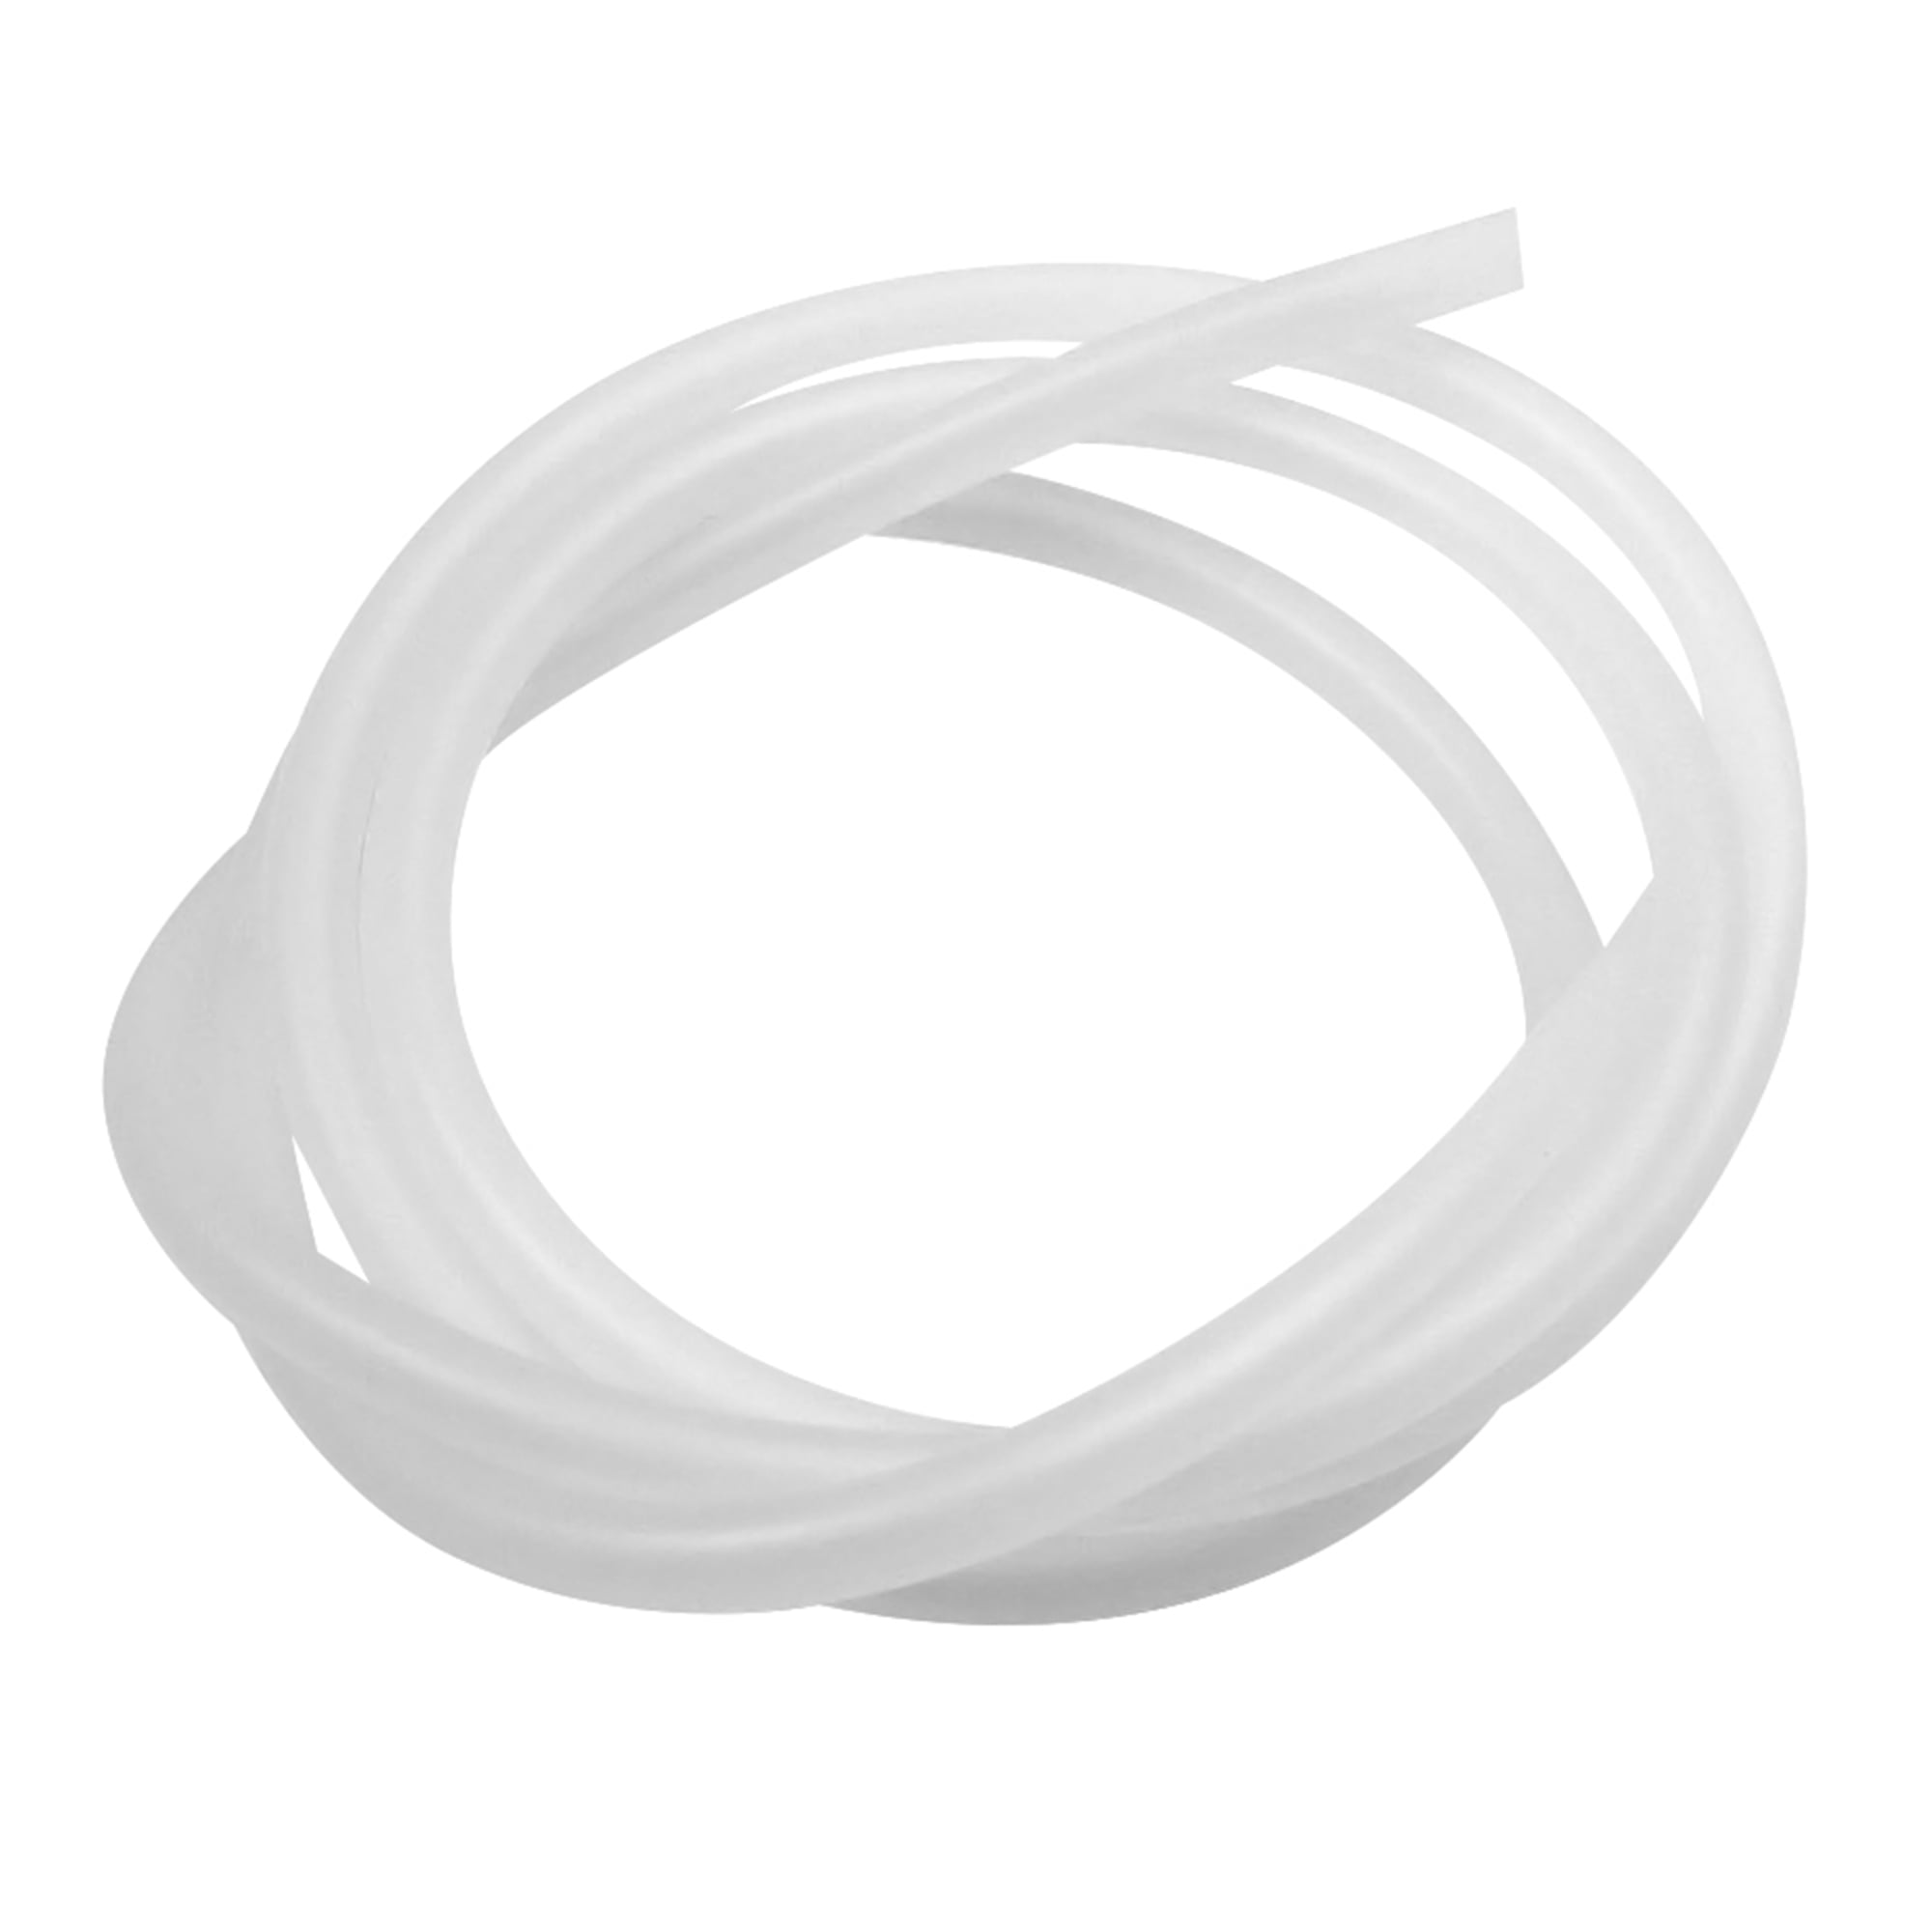 uxcell Silicone Tubing 1/32 Silicone Rubber Tube Air Hose Water Pipe for Pump Transfer Clear 5m 4mm 1mm ID X 5/32 OD 16ft